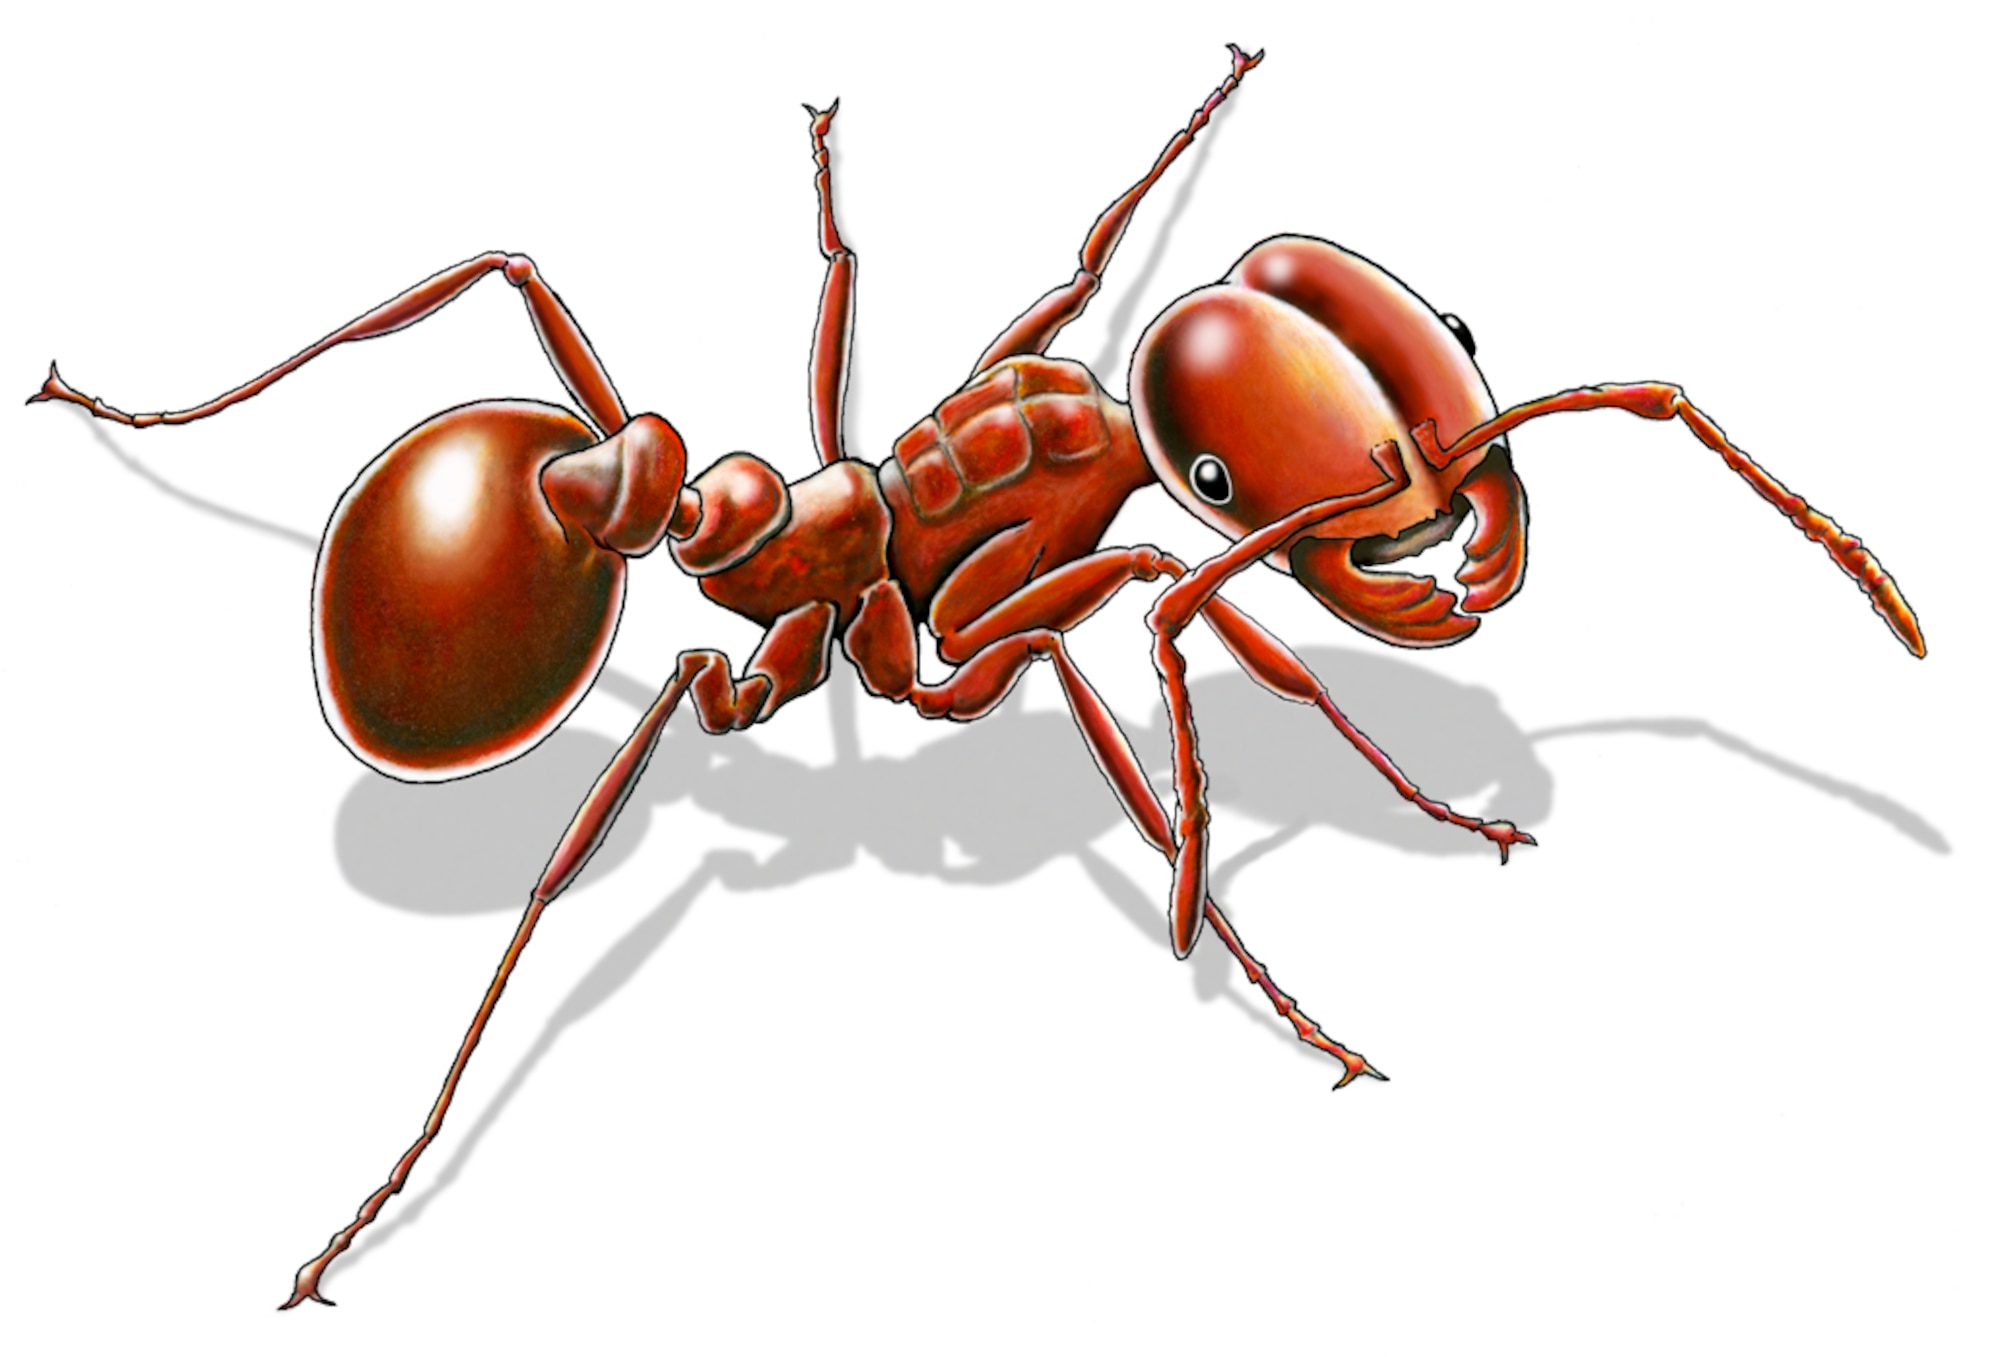 A color illustration of a Texas fire ant.  These insects fiercely defend their mounds as an Airman from San Antonio, Tex.  found out the hard way. (illustration by Sammie W. King)